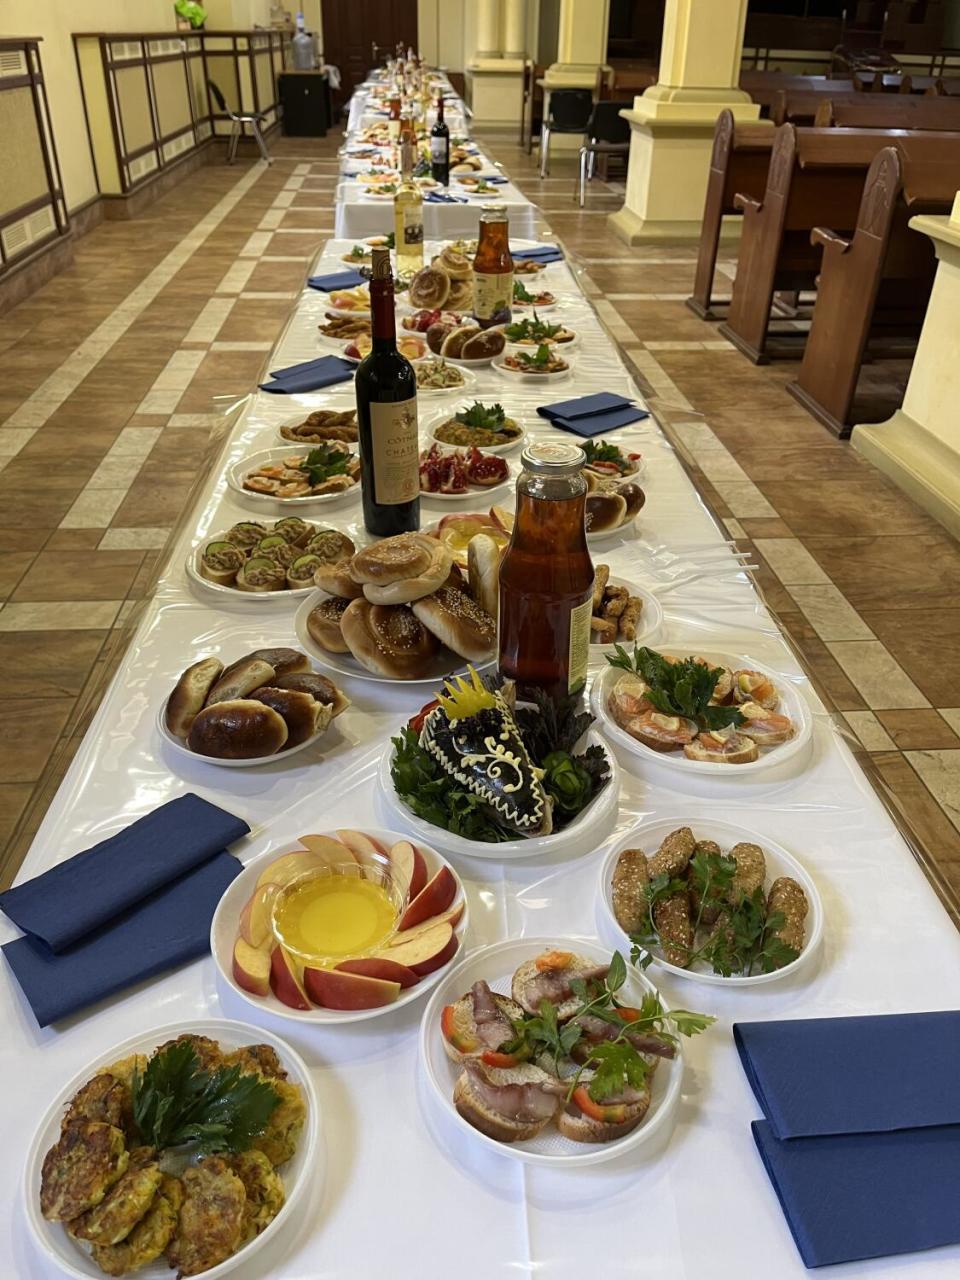 A long table, with white tablecloth and blue napkins, laden with plates of food and bottles of wine